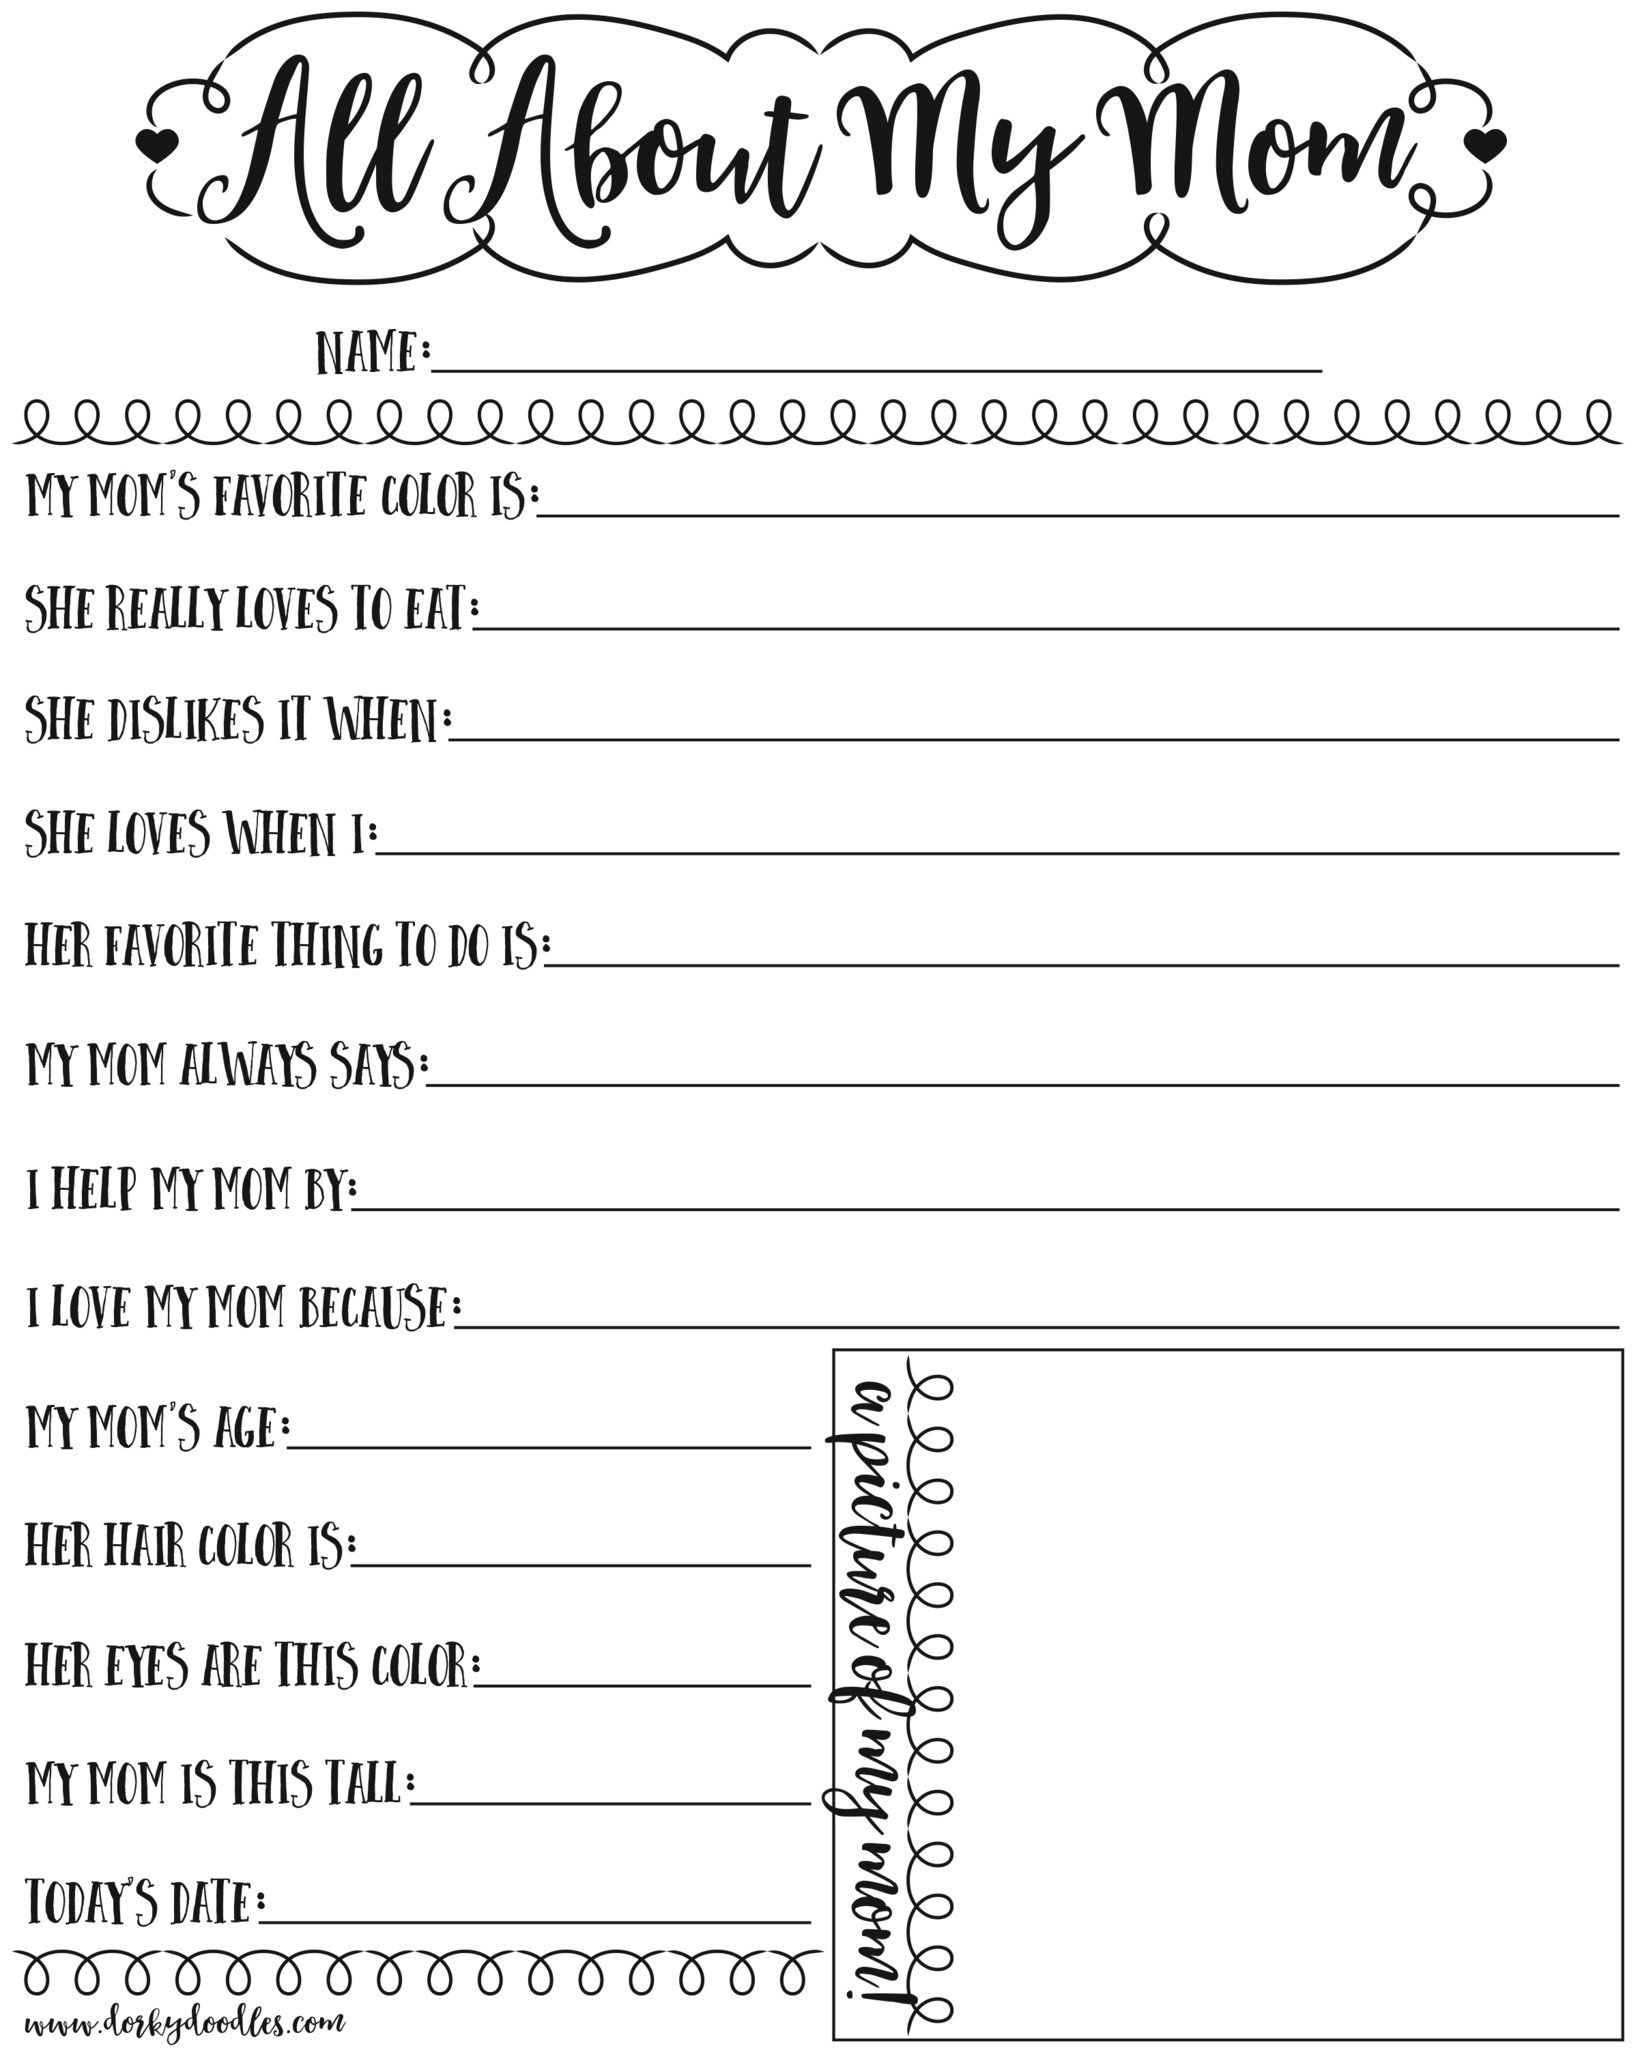 Mother S Day Quiz For Kids Free Printable – Dorky Doodles Best Ideas - Free Printable Mother&amp;#039;s Day Questionnaire